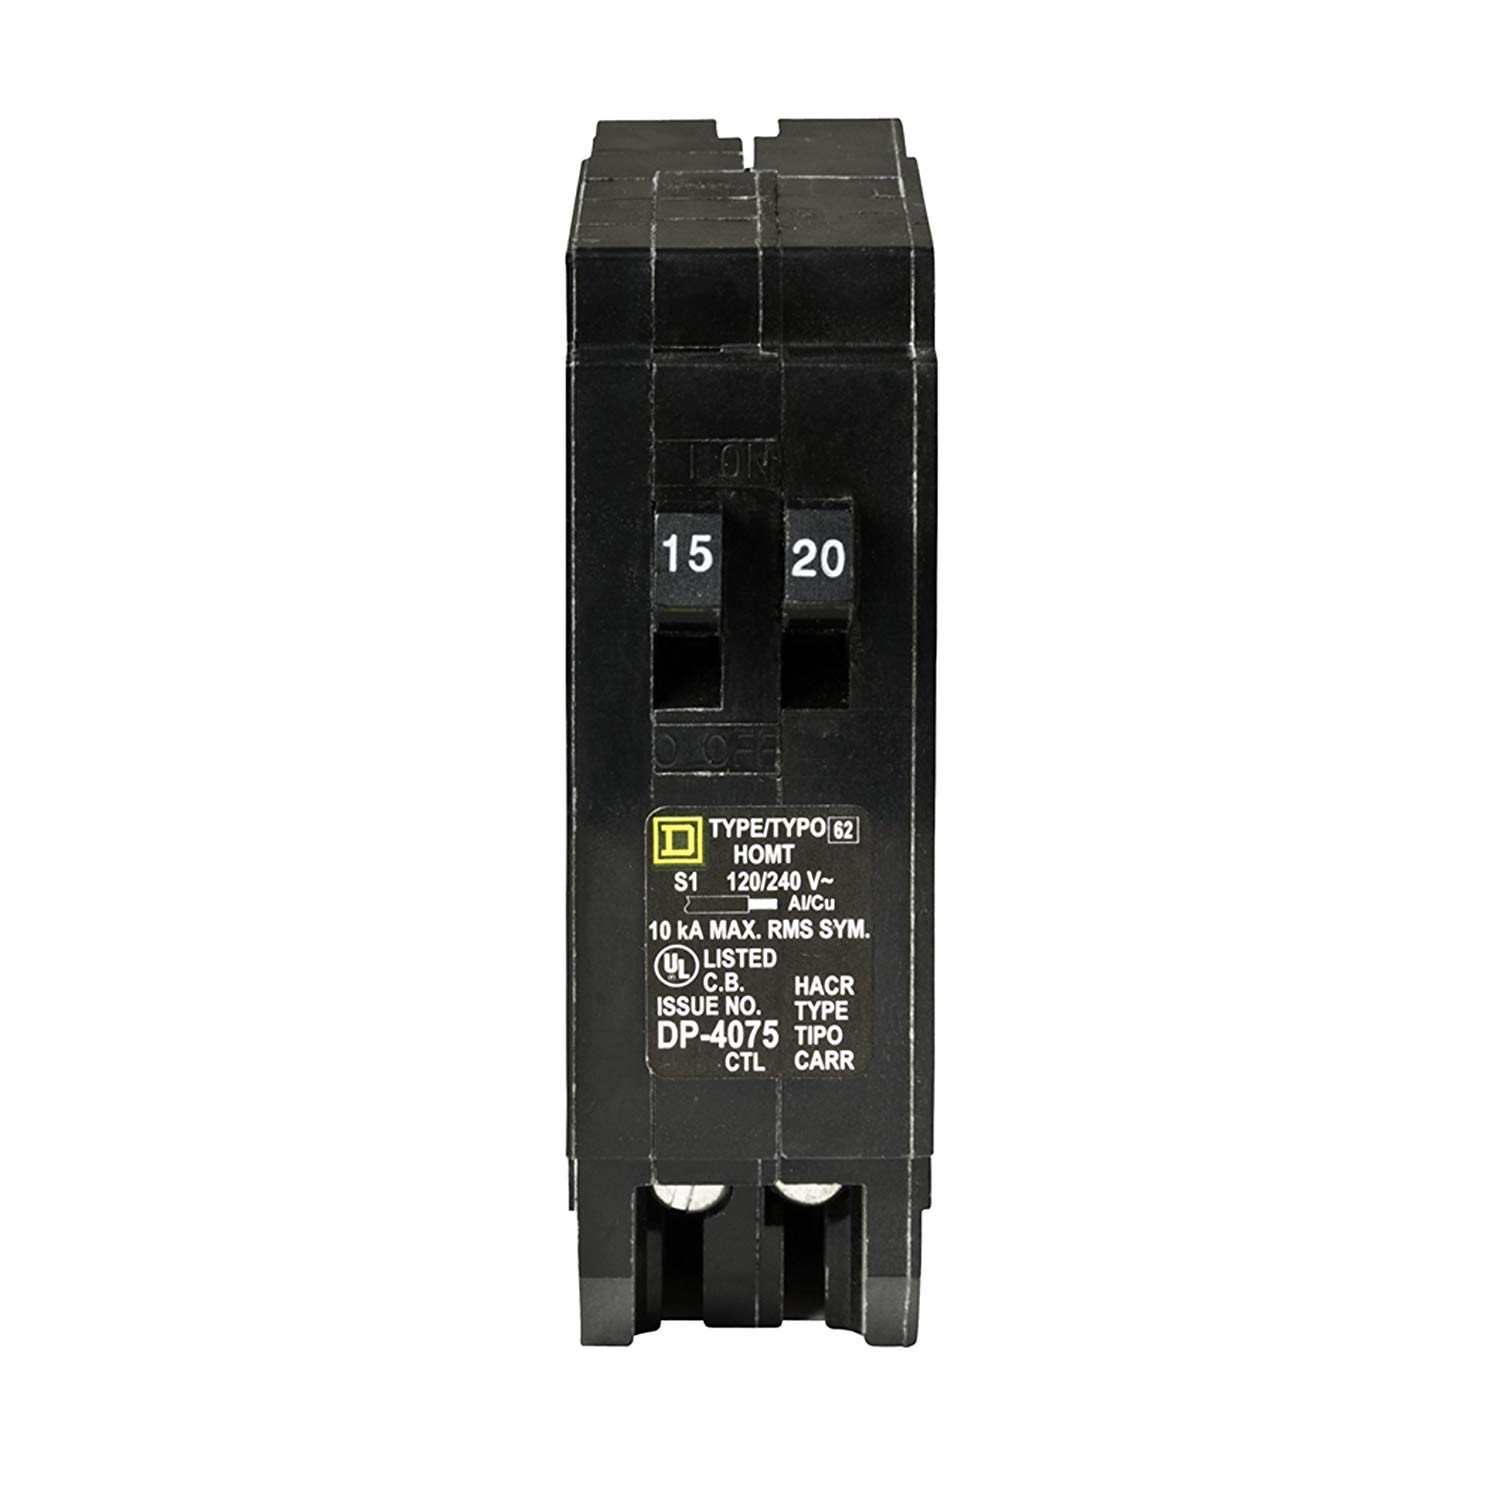 Square D Load Center Wiring Diagram Square D by Schneider Electric Homt1520cp Square D Homeline Single Of Square D Load Center Wiring Diagram